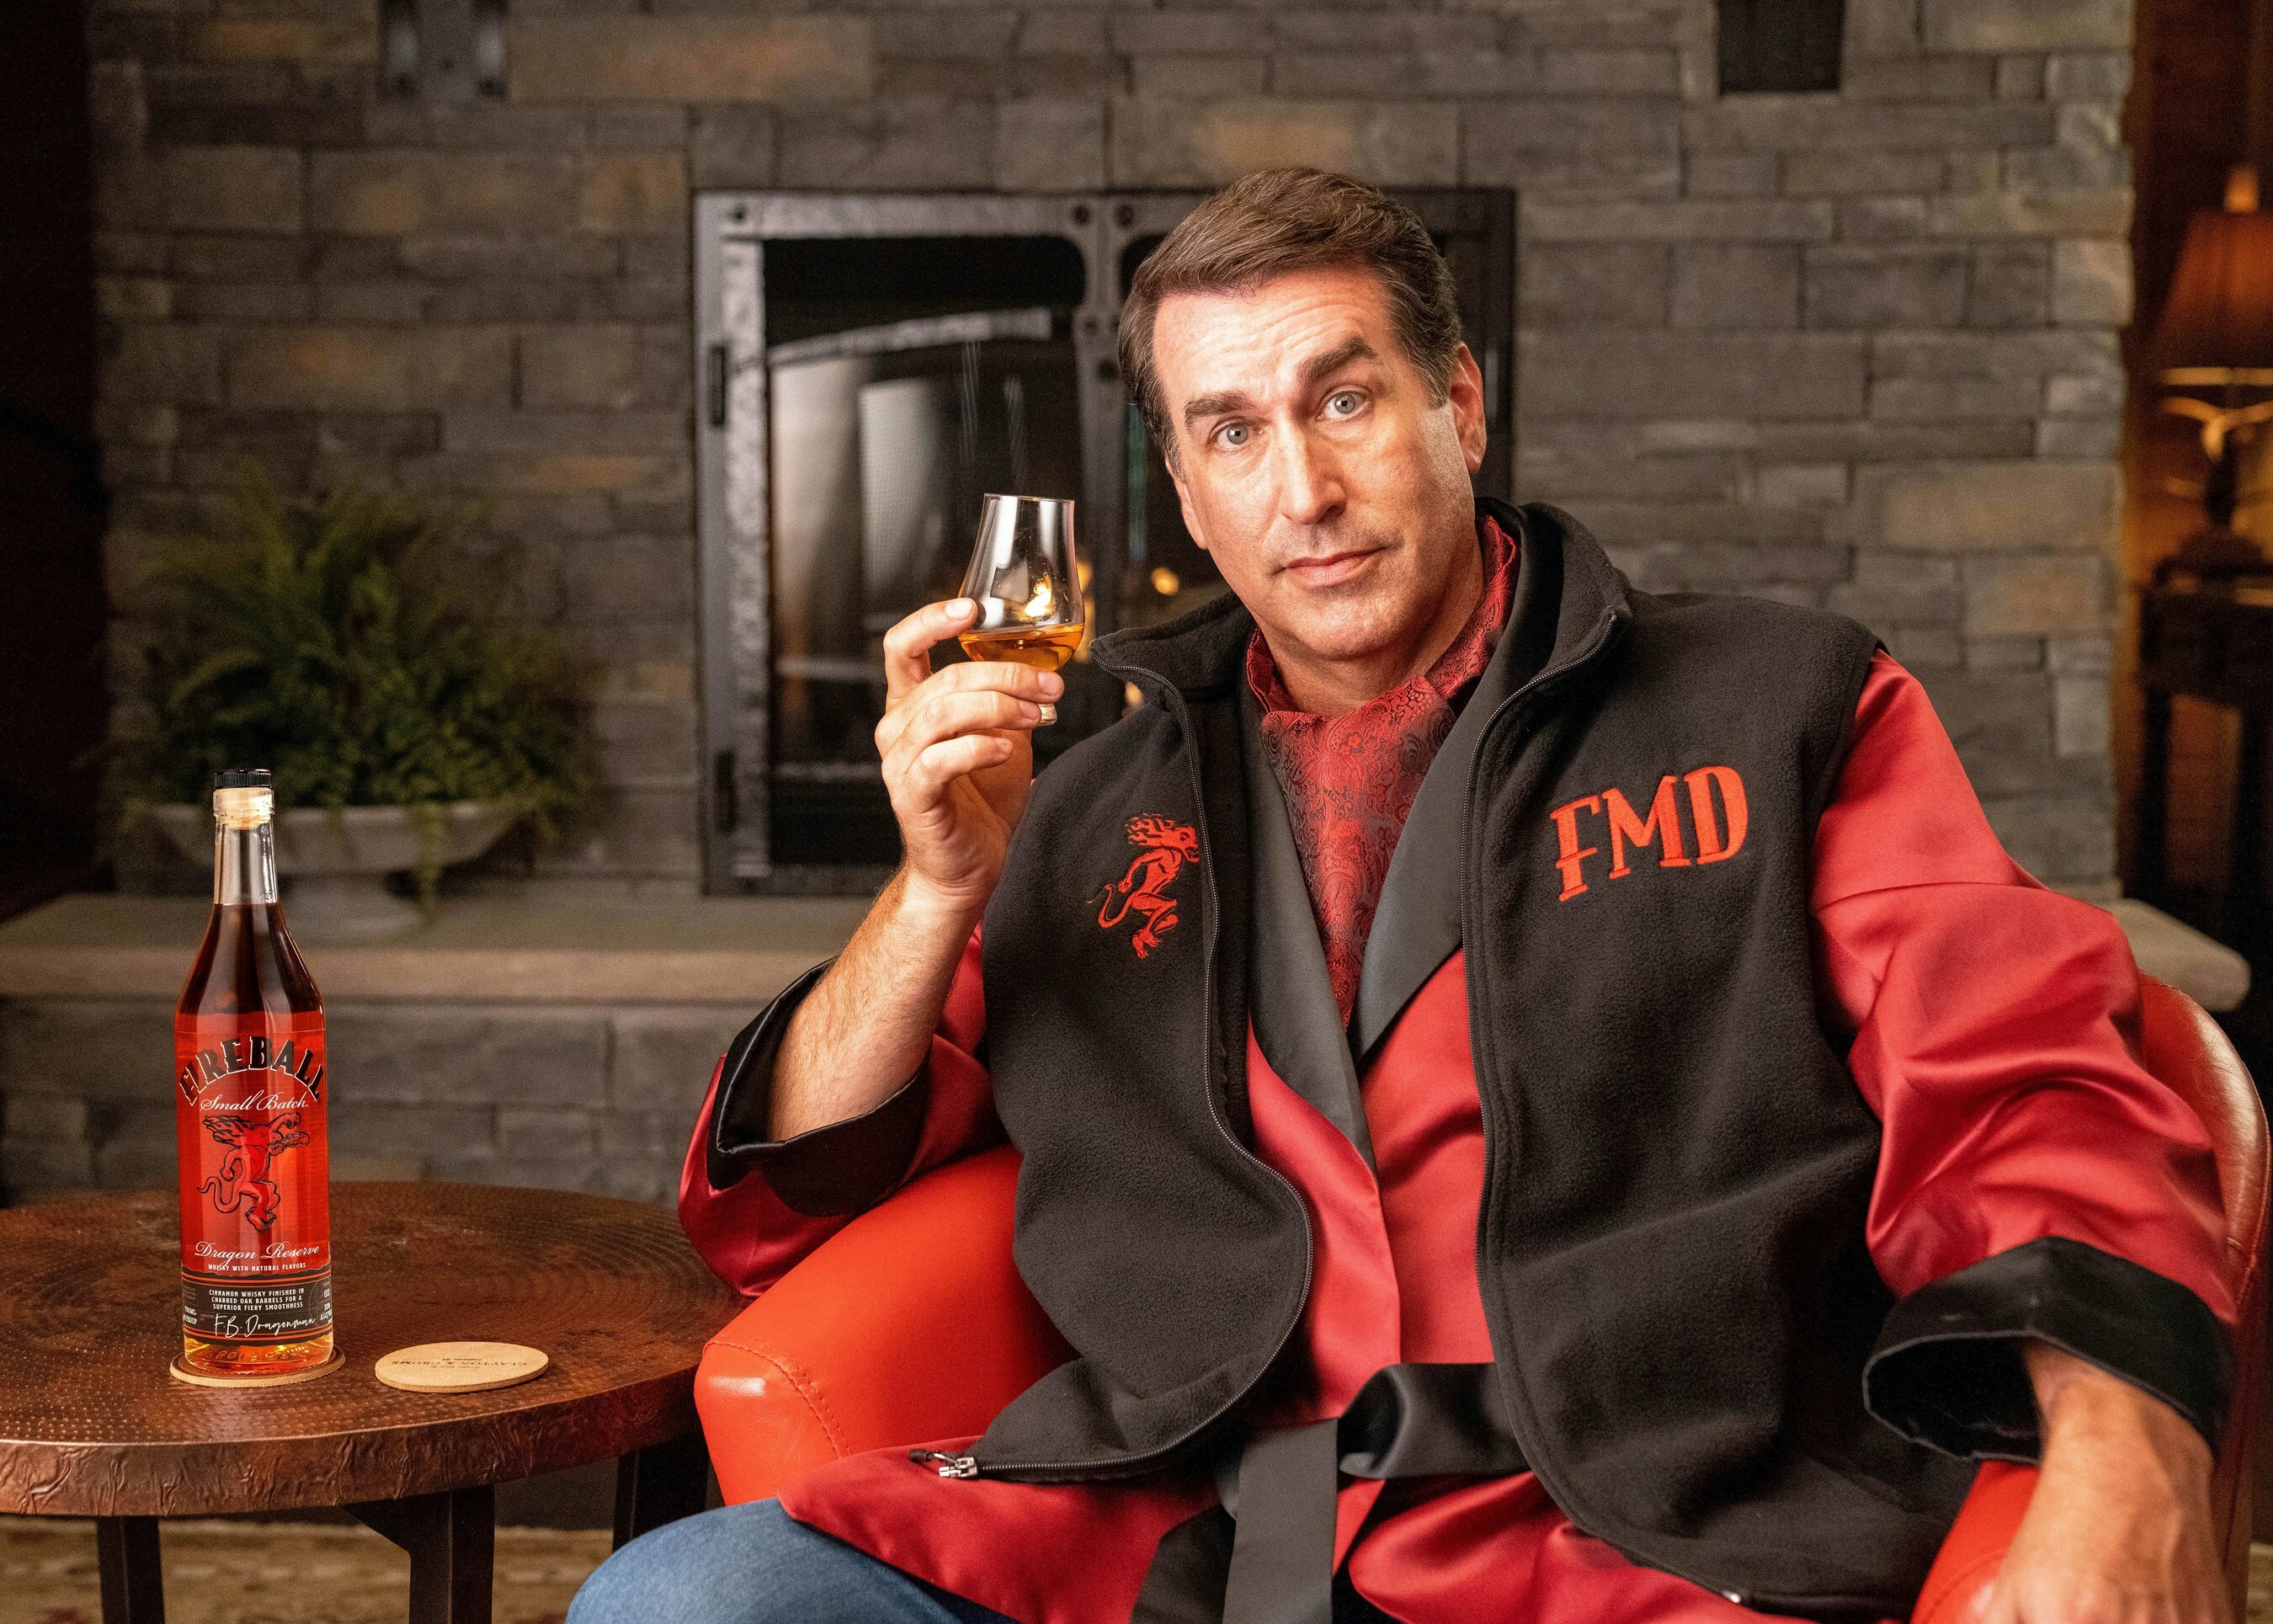 Rob Riggle is the Master Distiller for Fireball’s New Barrel-Aged Cinnamon Whisky